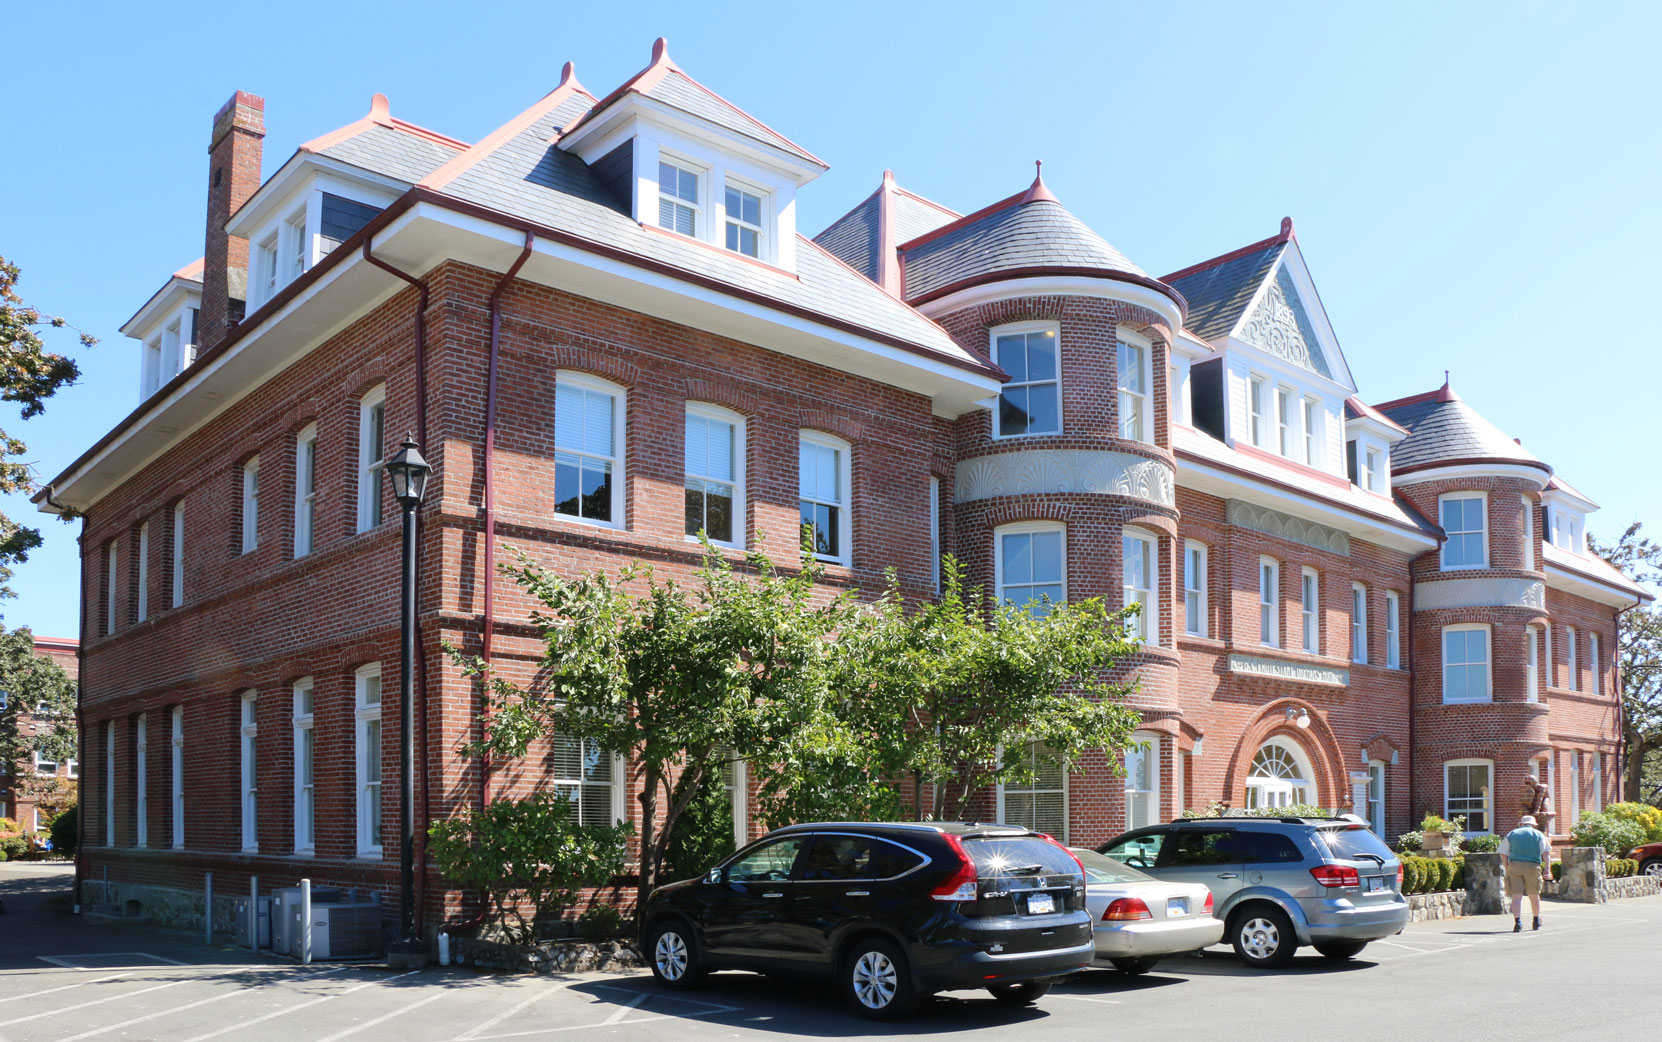 The Cridge Center, originally built in 1893 by architect Thomas Hooper as the B.C. Protestant orphans Home (photo by Victoria Online Sightseeing Tours)